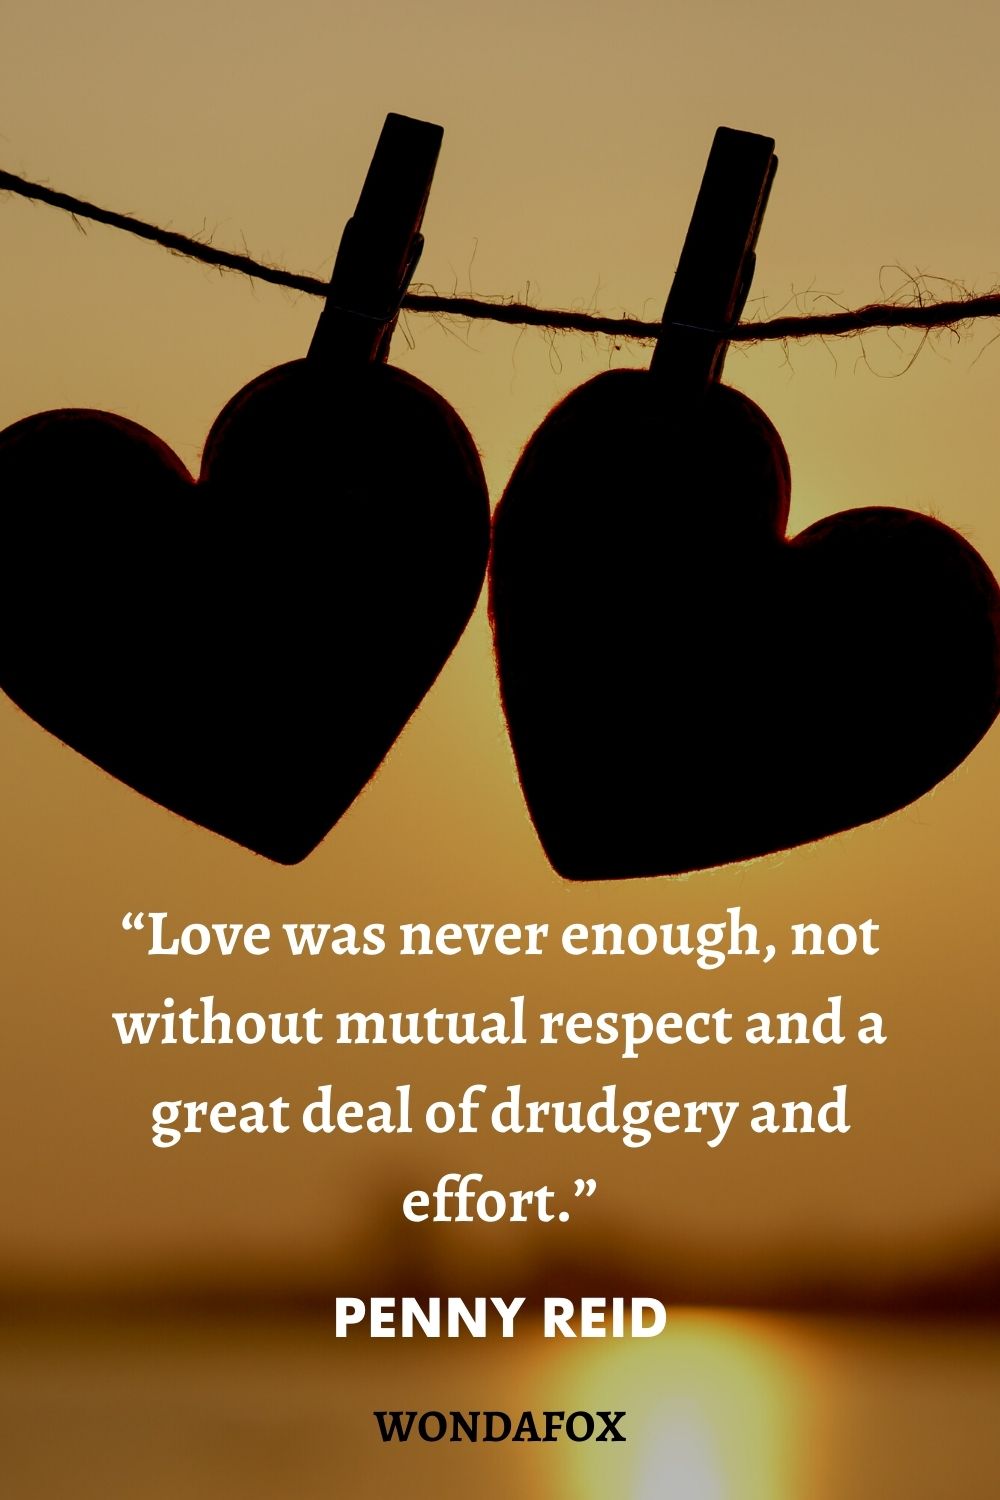 “Love was never enough, not without mutual respect and a great deal of drudgery and effort.”
Penny Reid